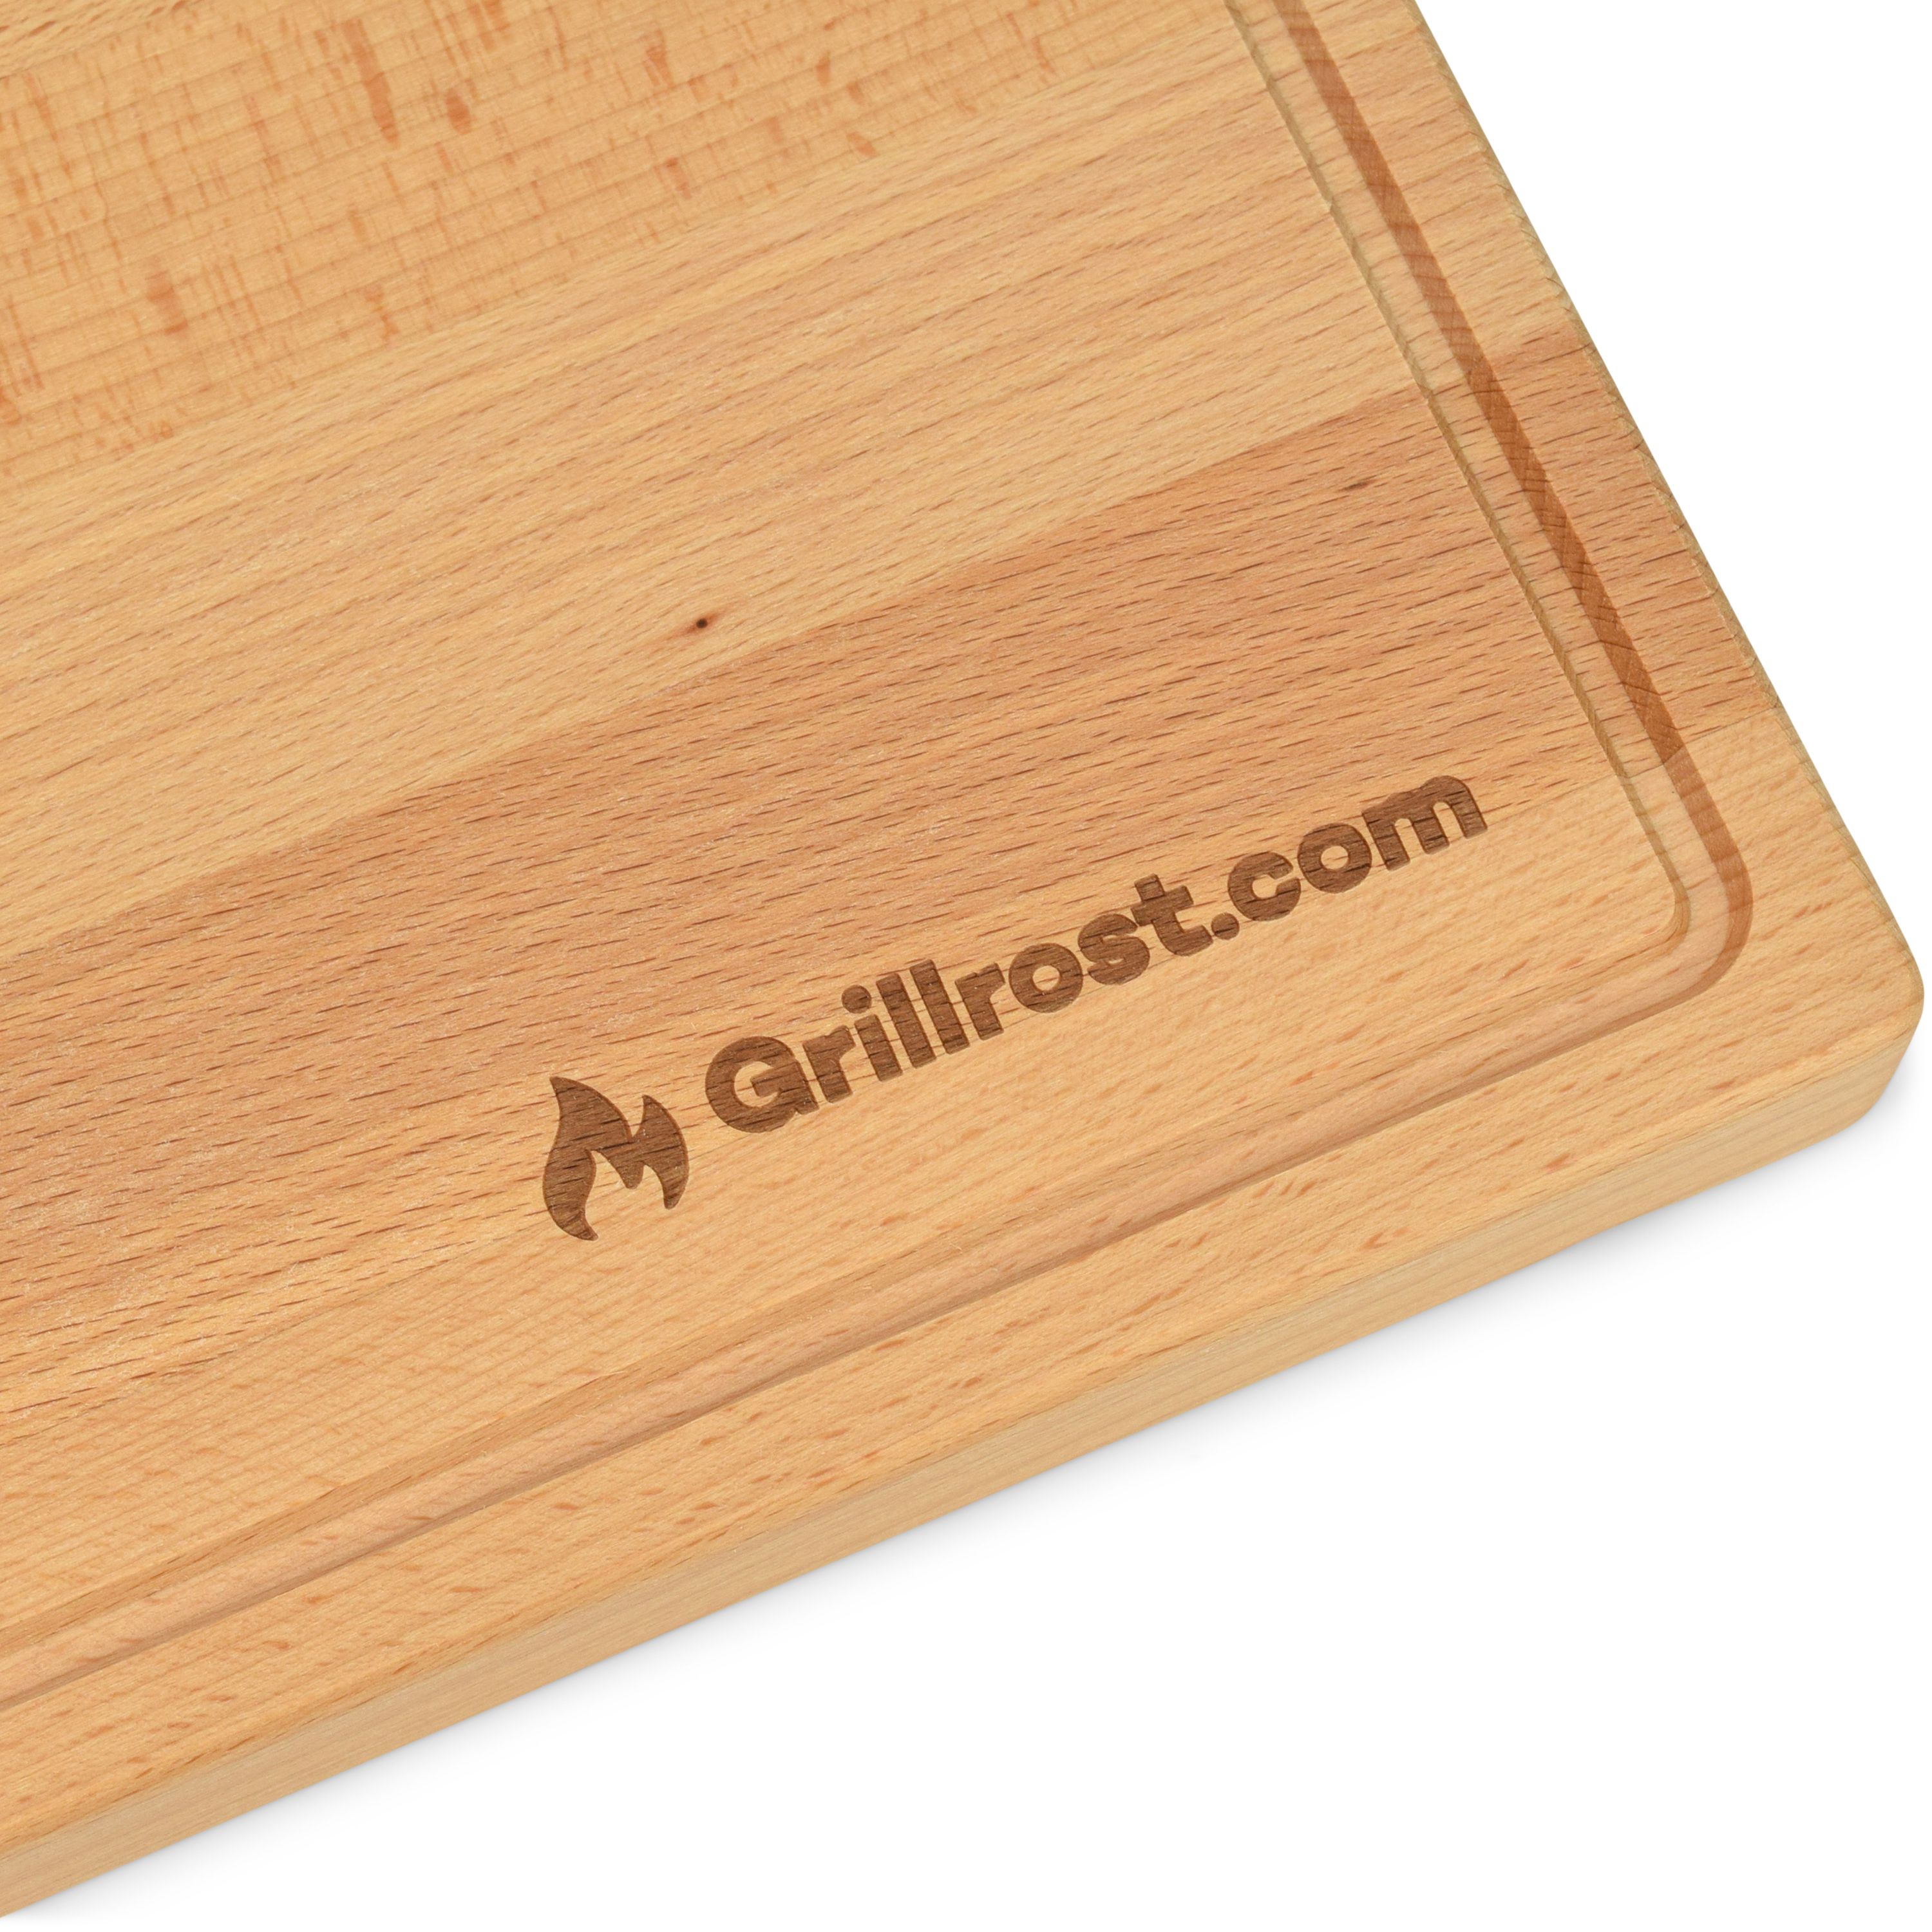 Grillrost.com Cutting Board - Beech 40mm - suitable for the wooden board holder